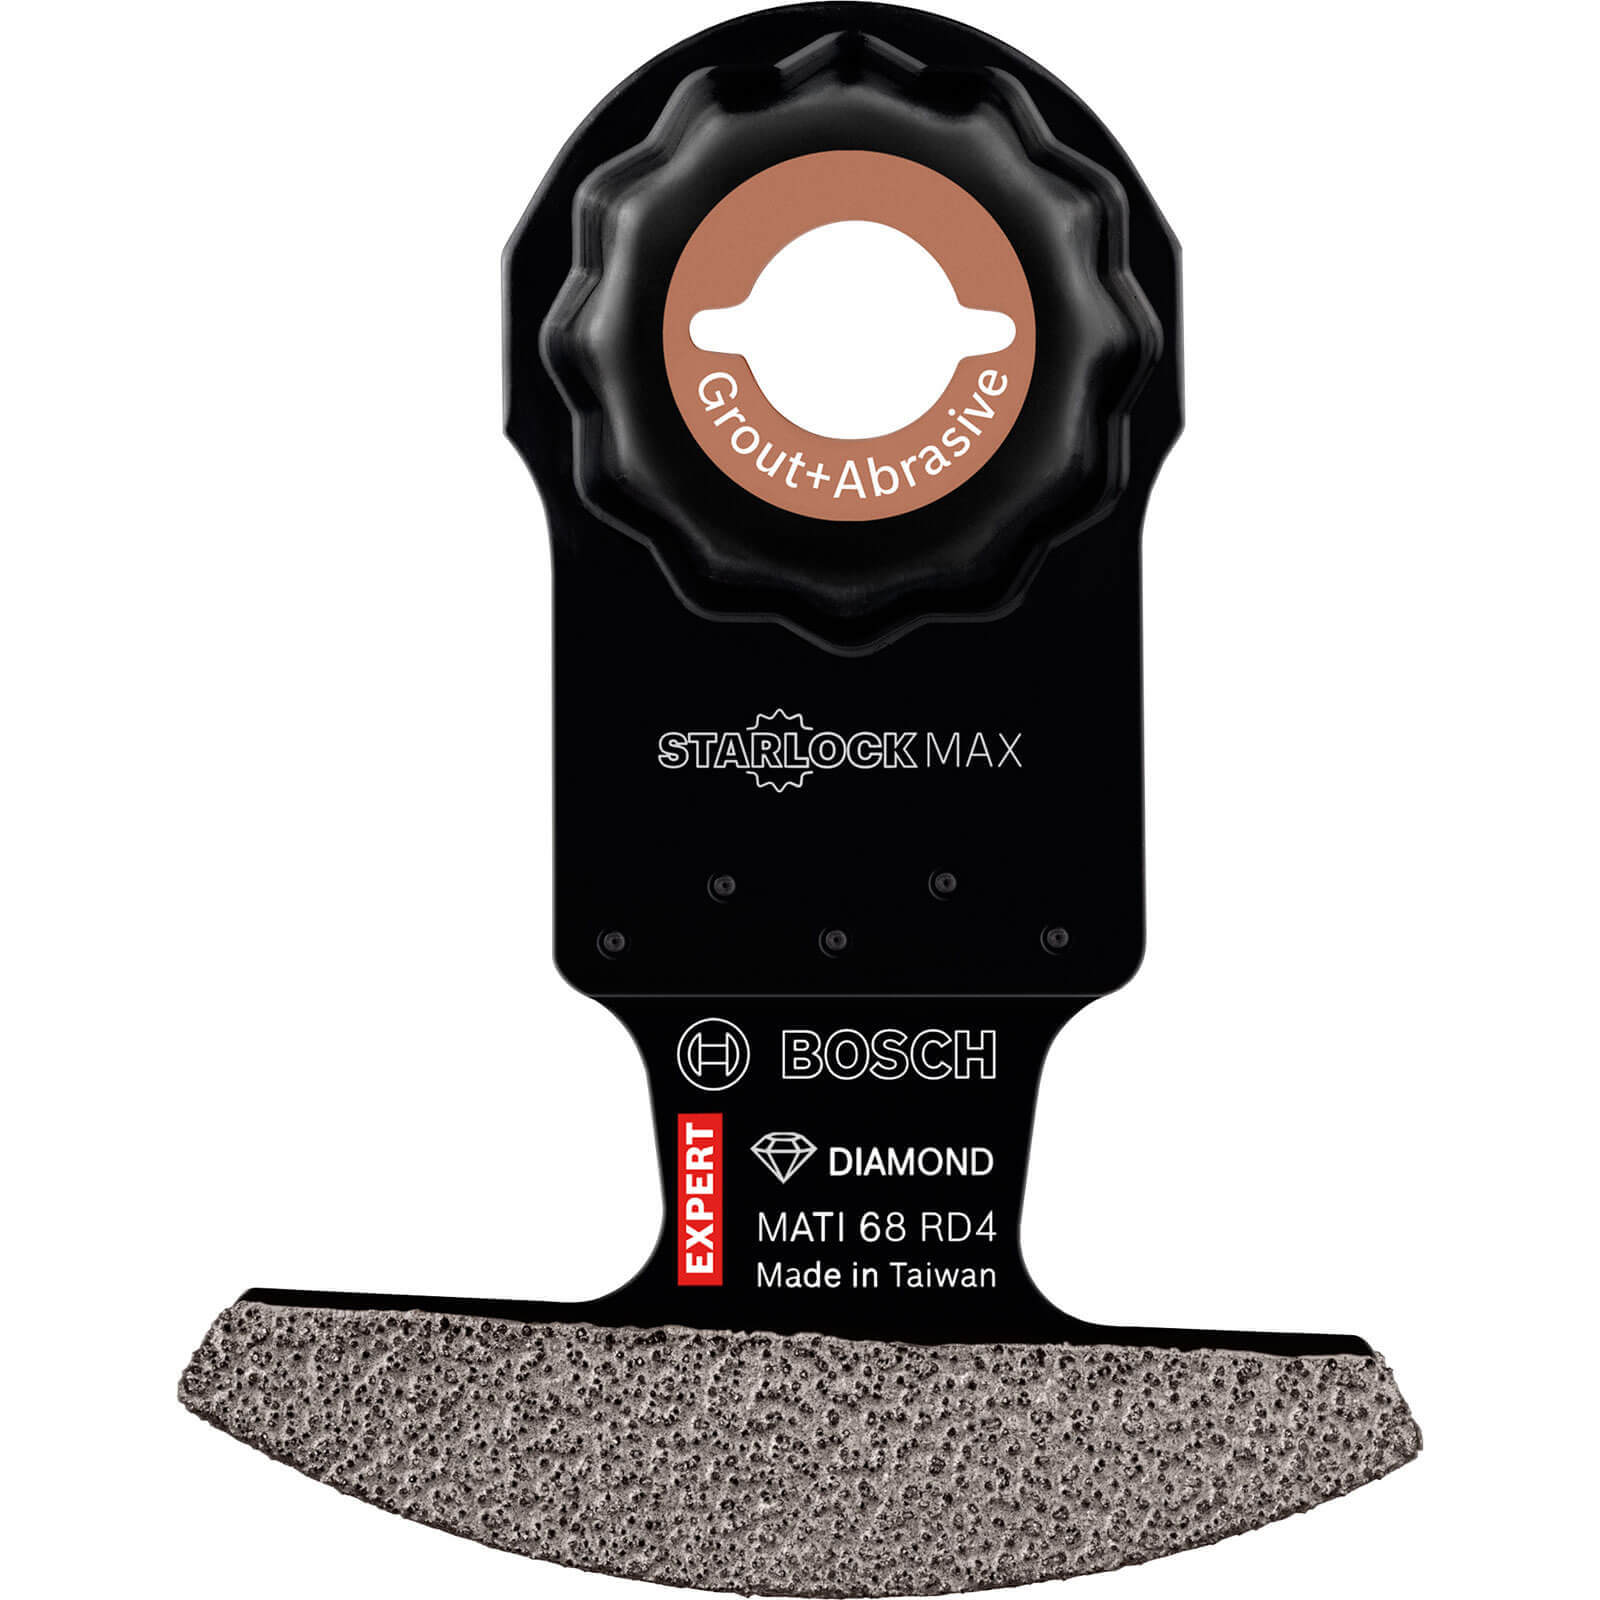 Photo of Bosch Expert Mati 68 Rd4 Abrasive And Grout Starlock Max Oscillating Multi Tool Segment Saw Blade 68mm Pack Of 1